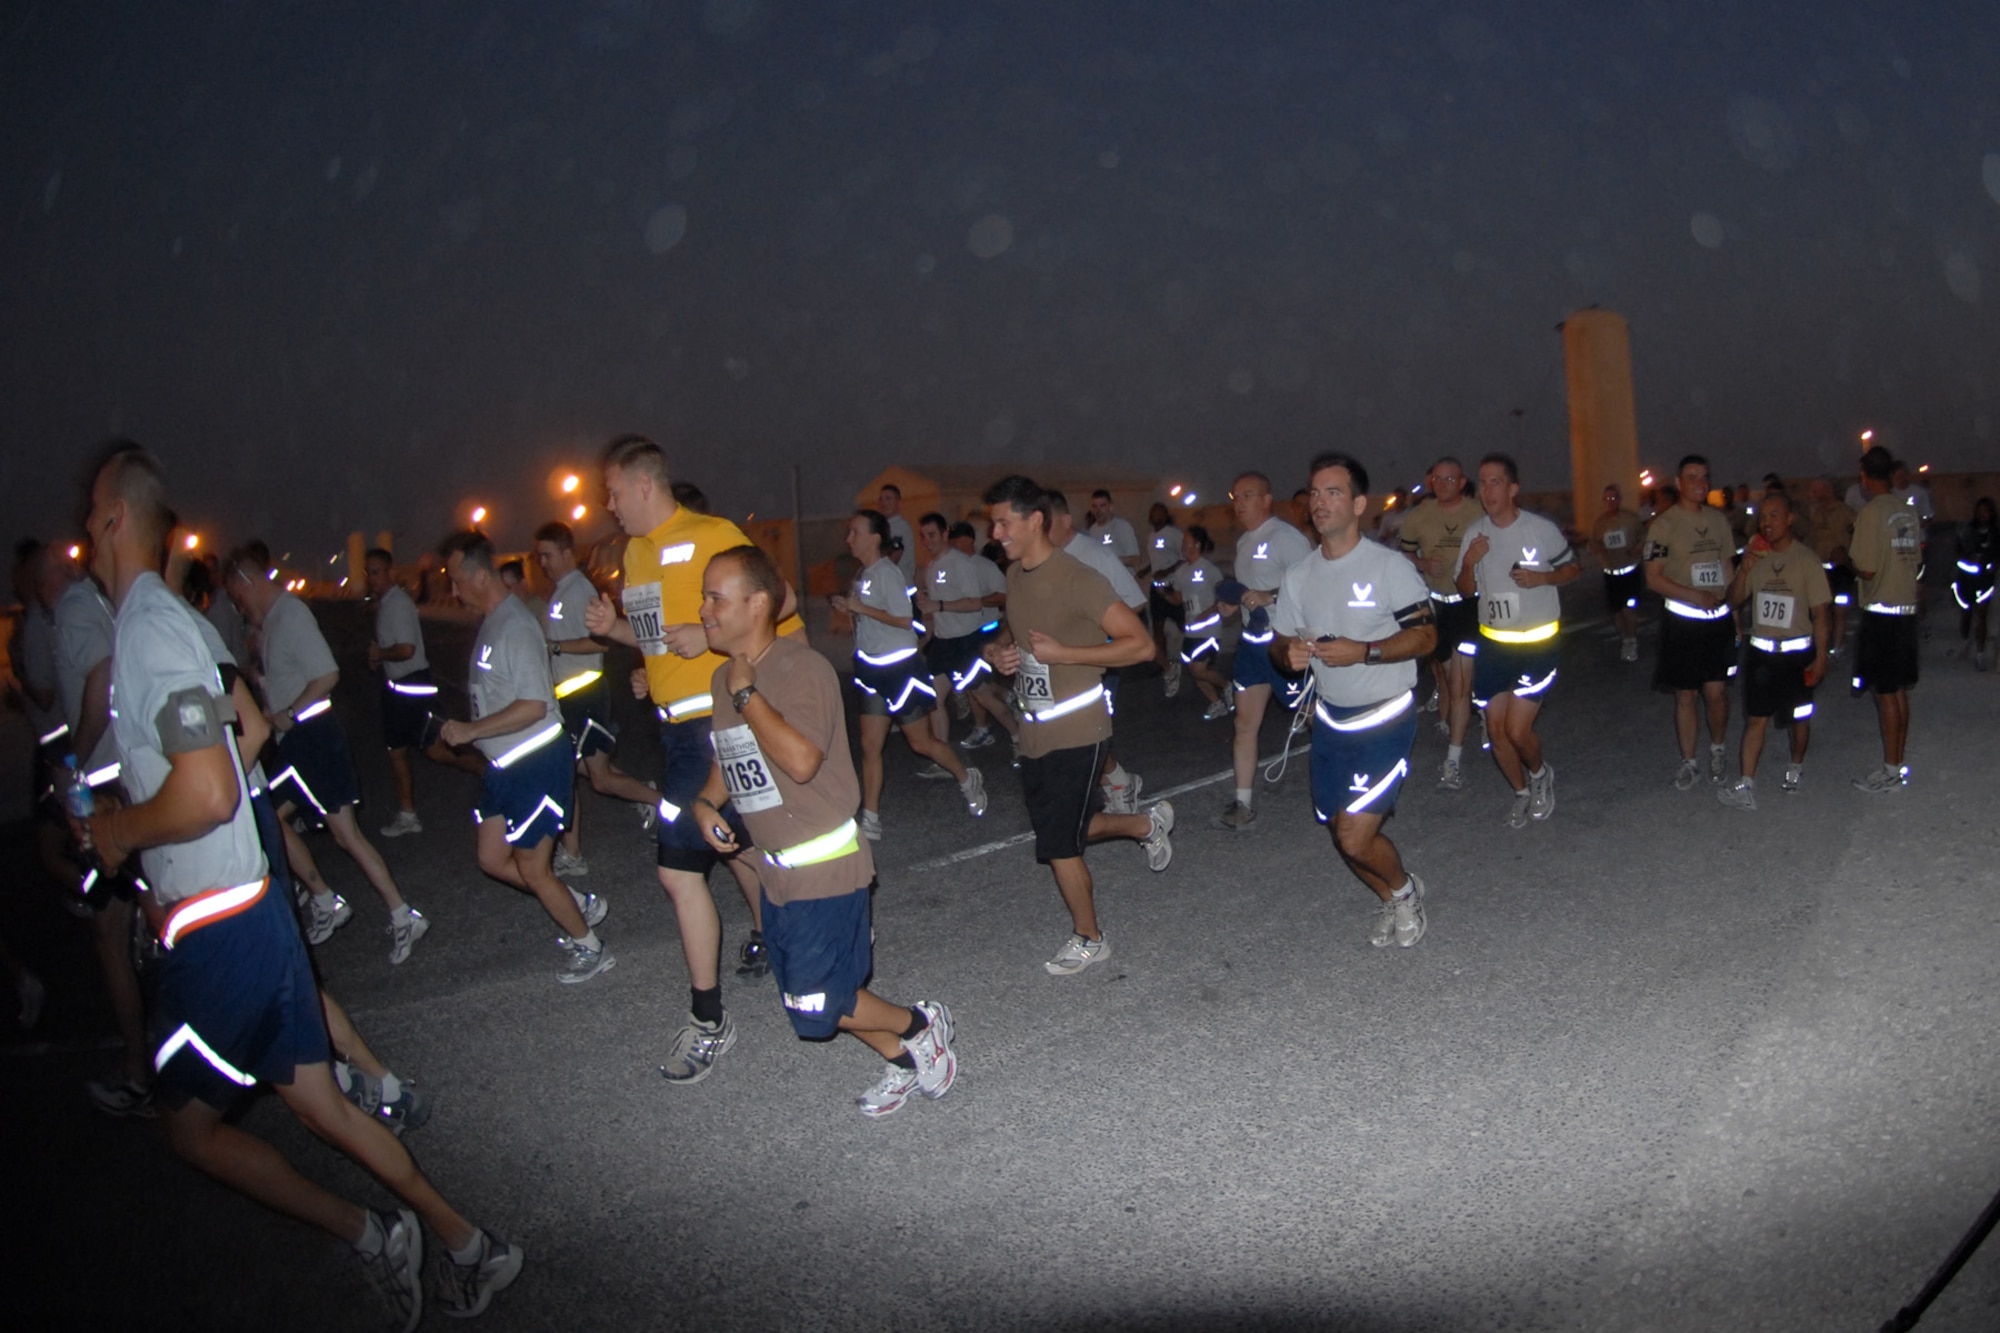 SOUTHWEST ASIA -- Deployed servicemembers begin an early-morning start in the base half-marathon and 10K runs, here, Sept. 11. More than 350 participants gathered for the run just as the sun was starting to rise over the region. (U.S. Air Force Photo/Tech. Sgt. Jason W. Edwards)